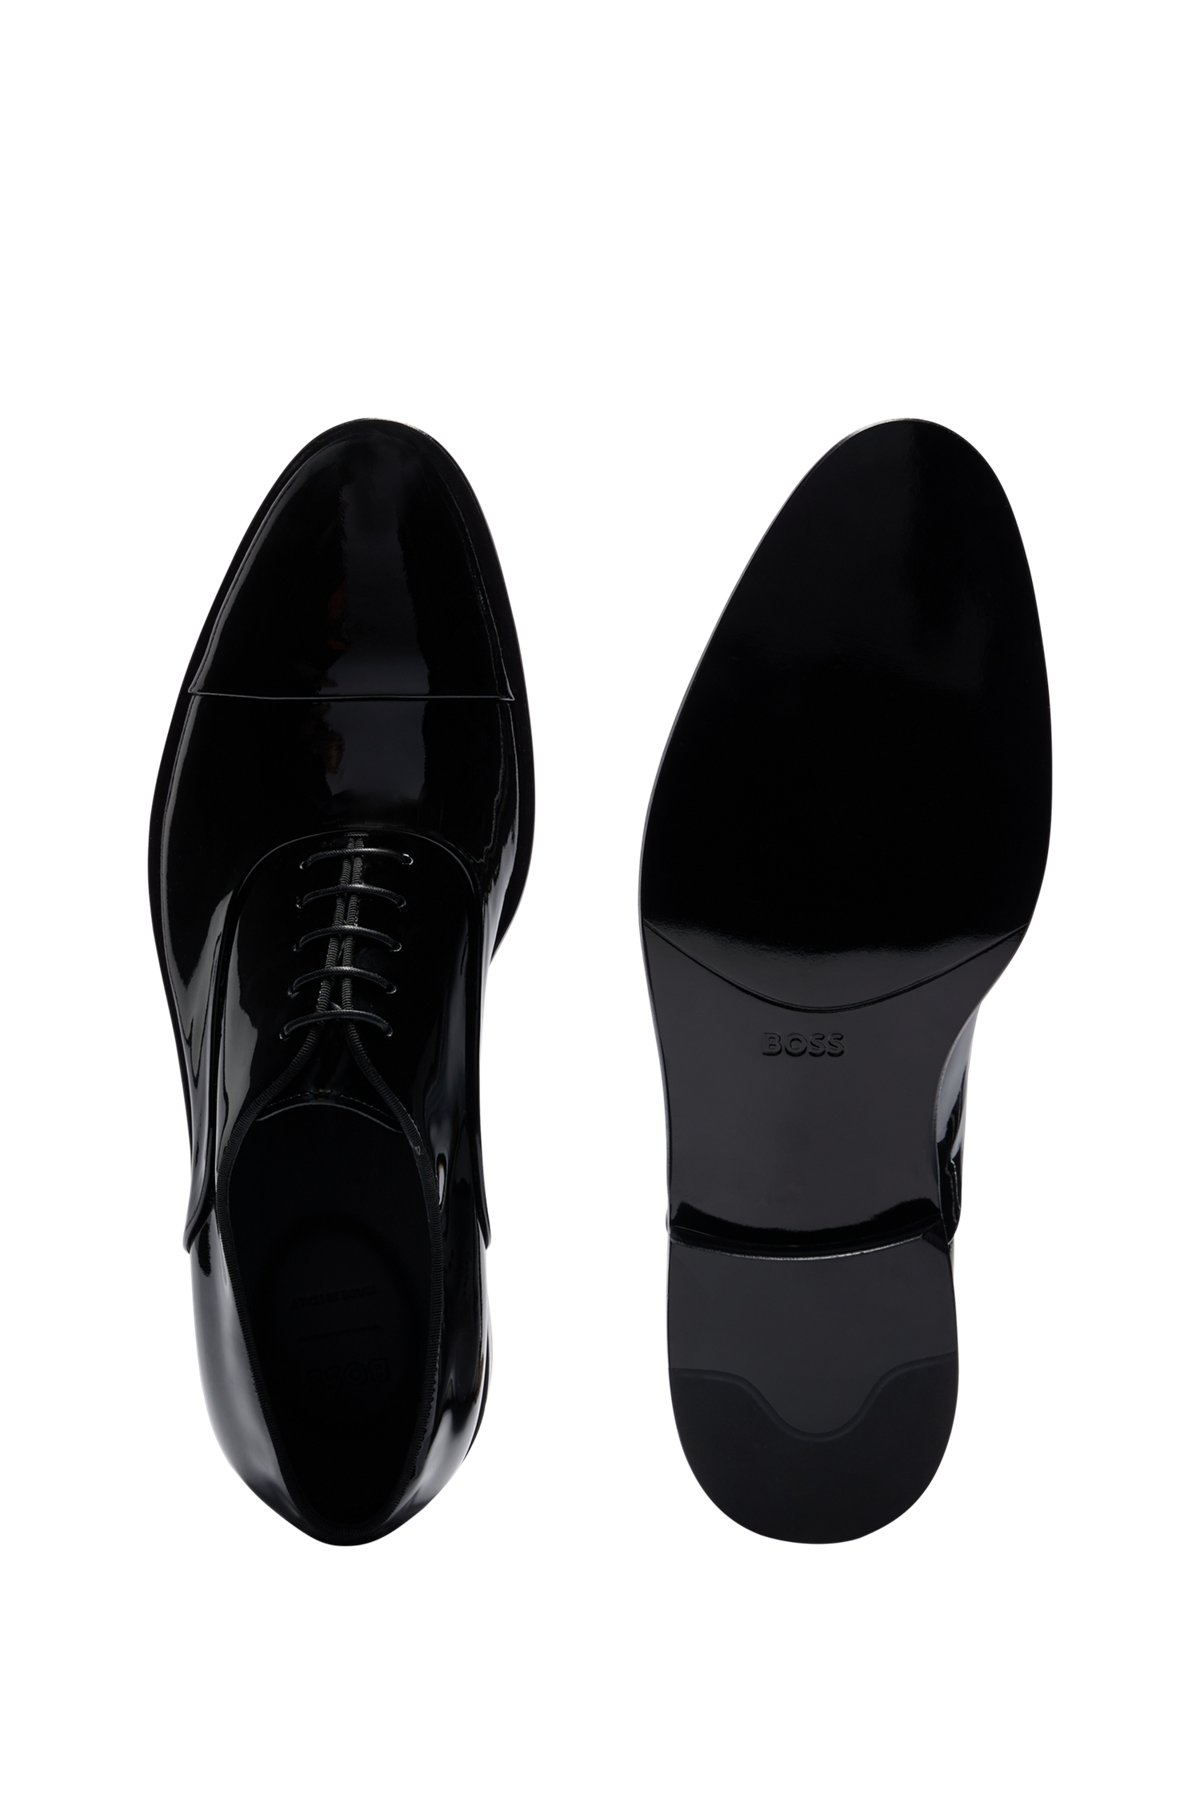 Italian-made Oxford shoes in patent leather, Black